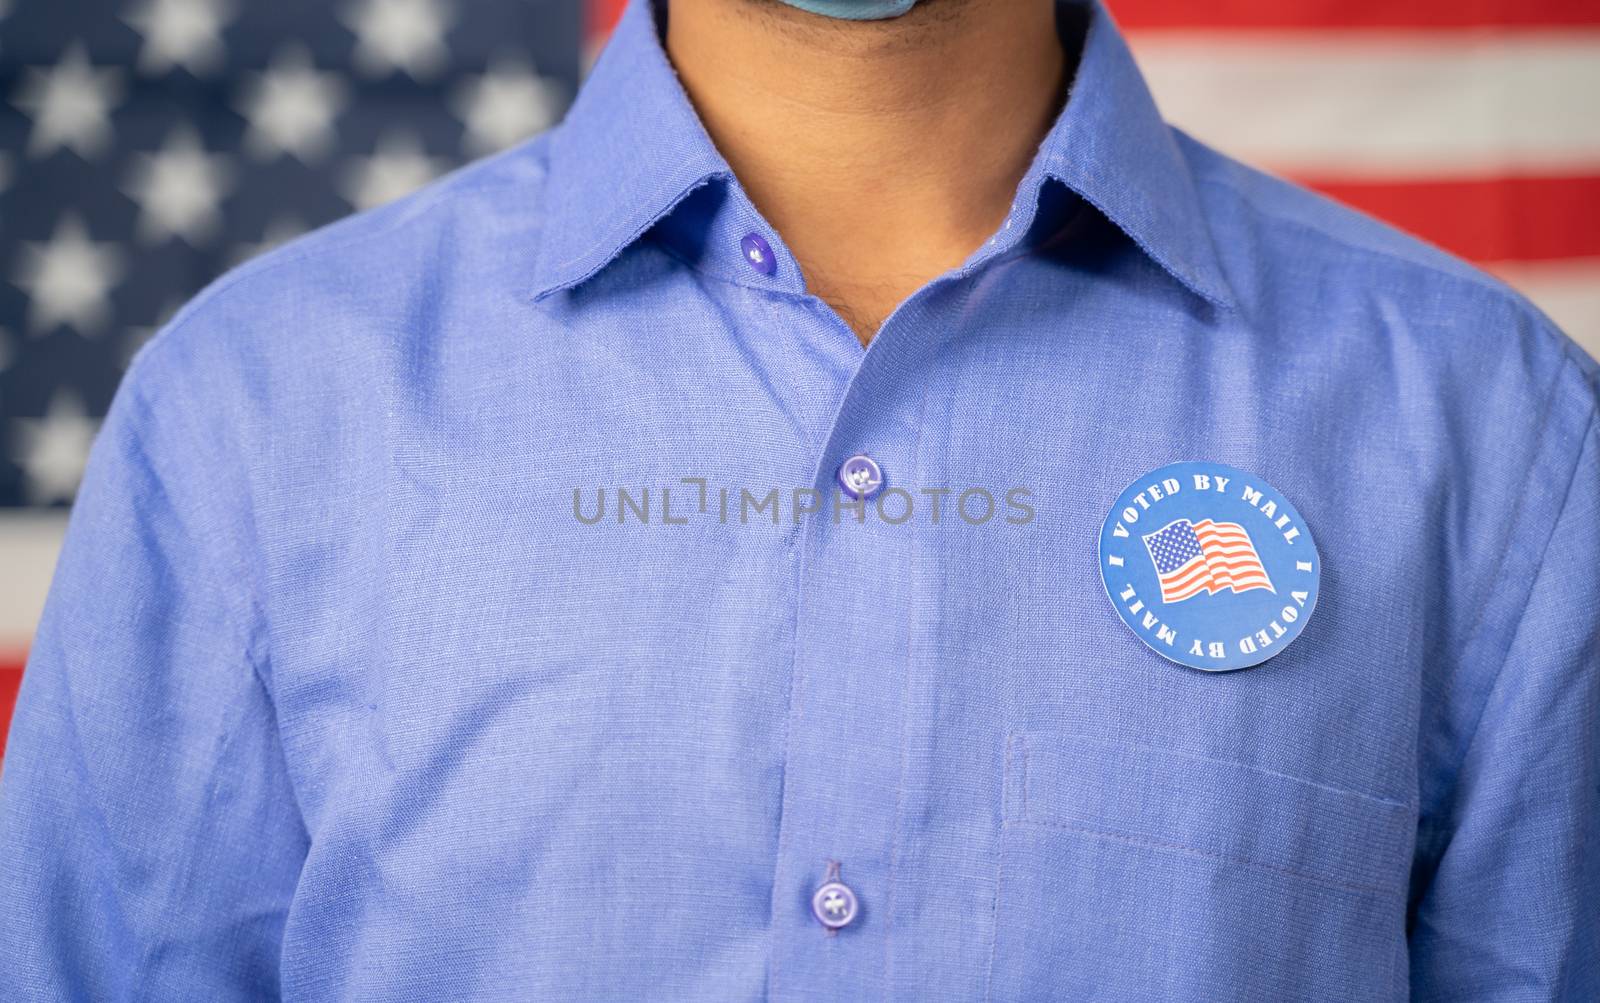 Unrecognizable Man Pasted I voted by mail sticker on his sticker with US flag as background - Concept of US election, mail-in voting or vote by mail by lakshmiprasad.maski@gmai.com